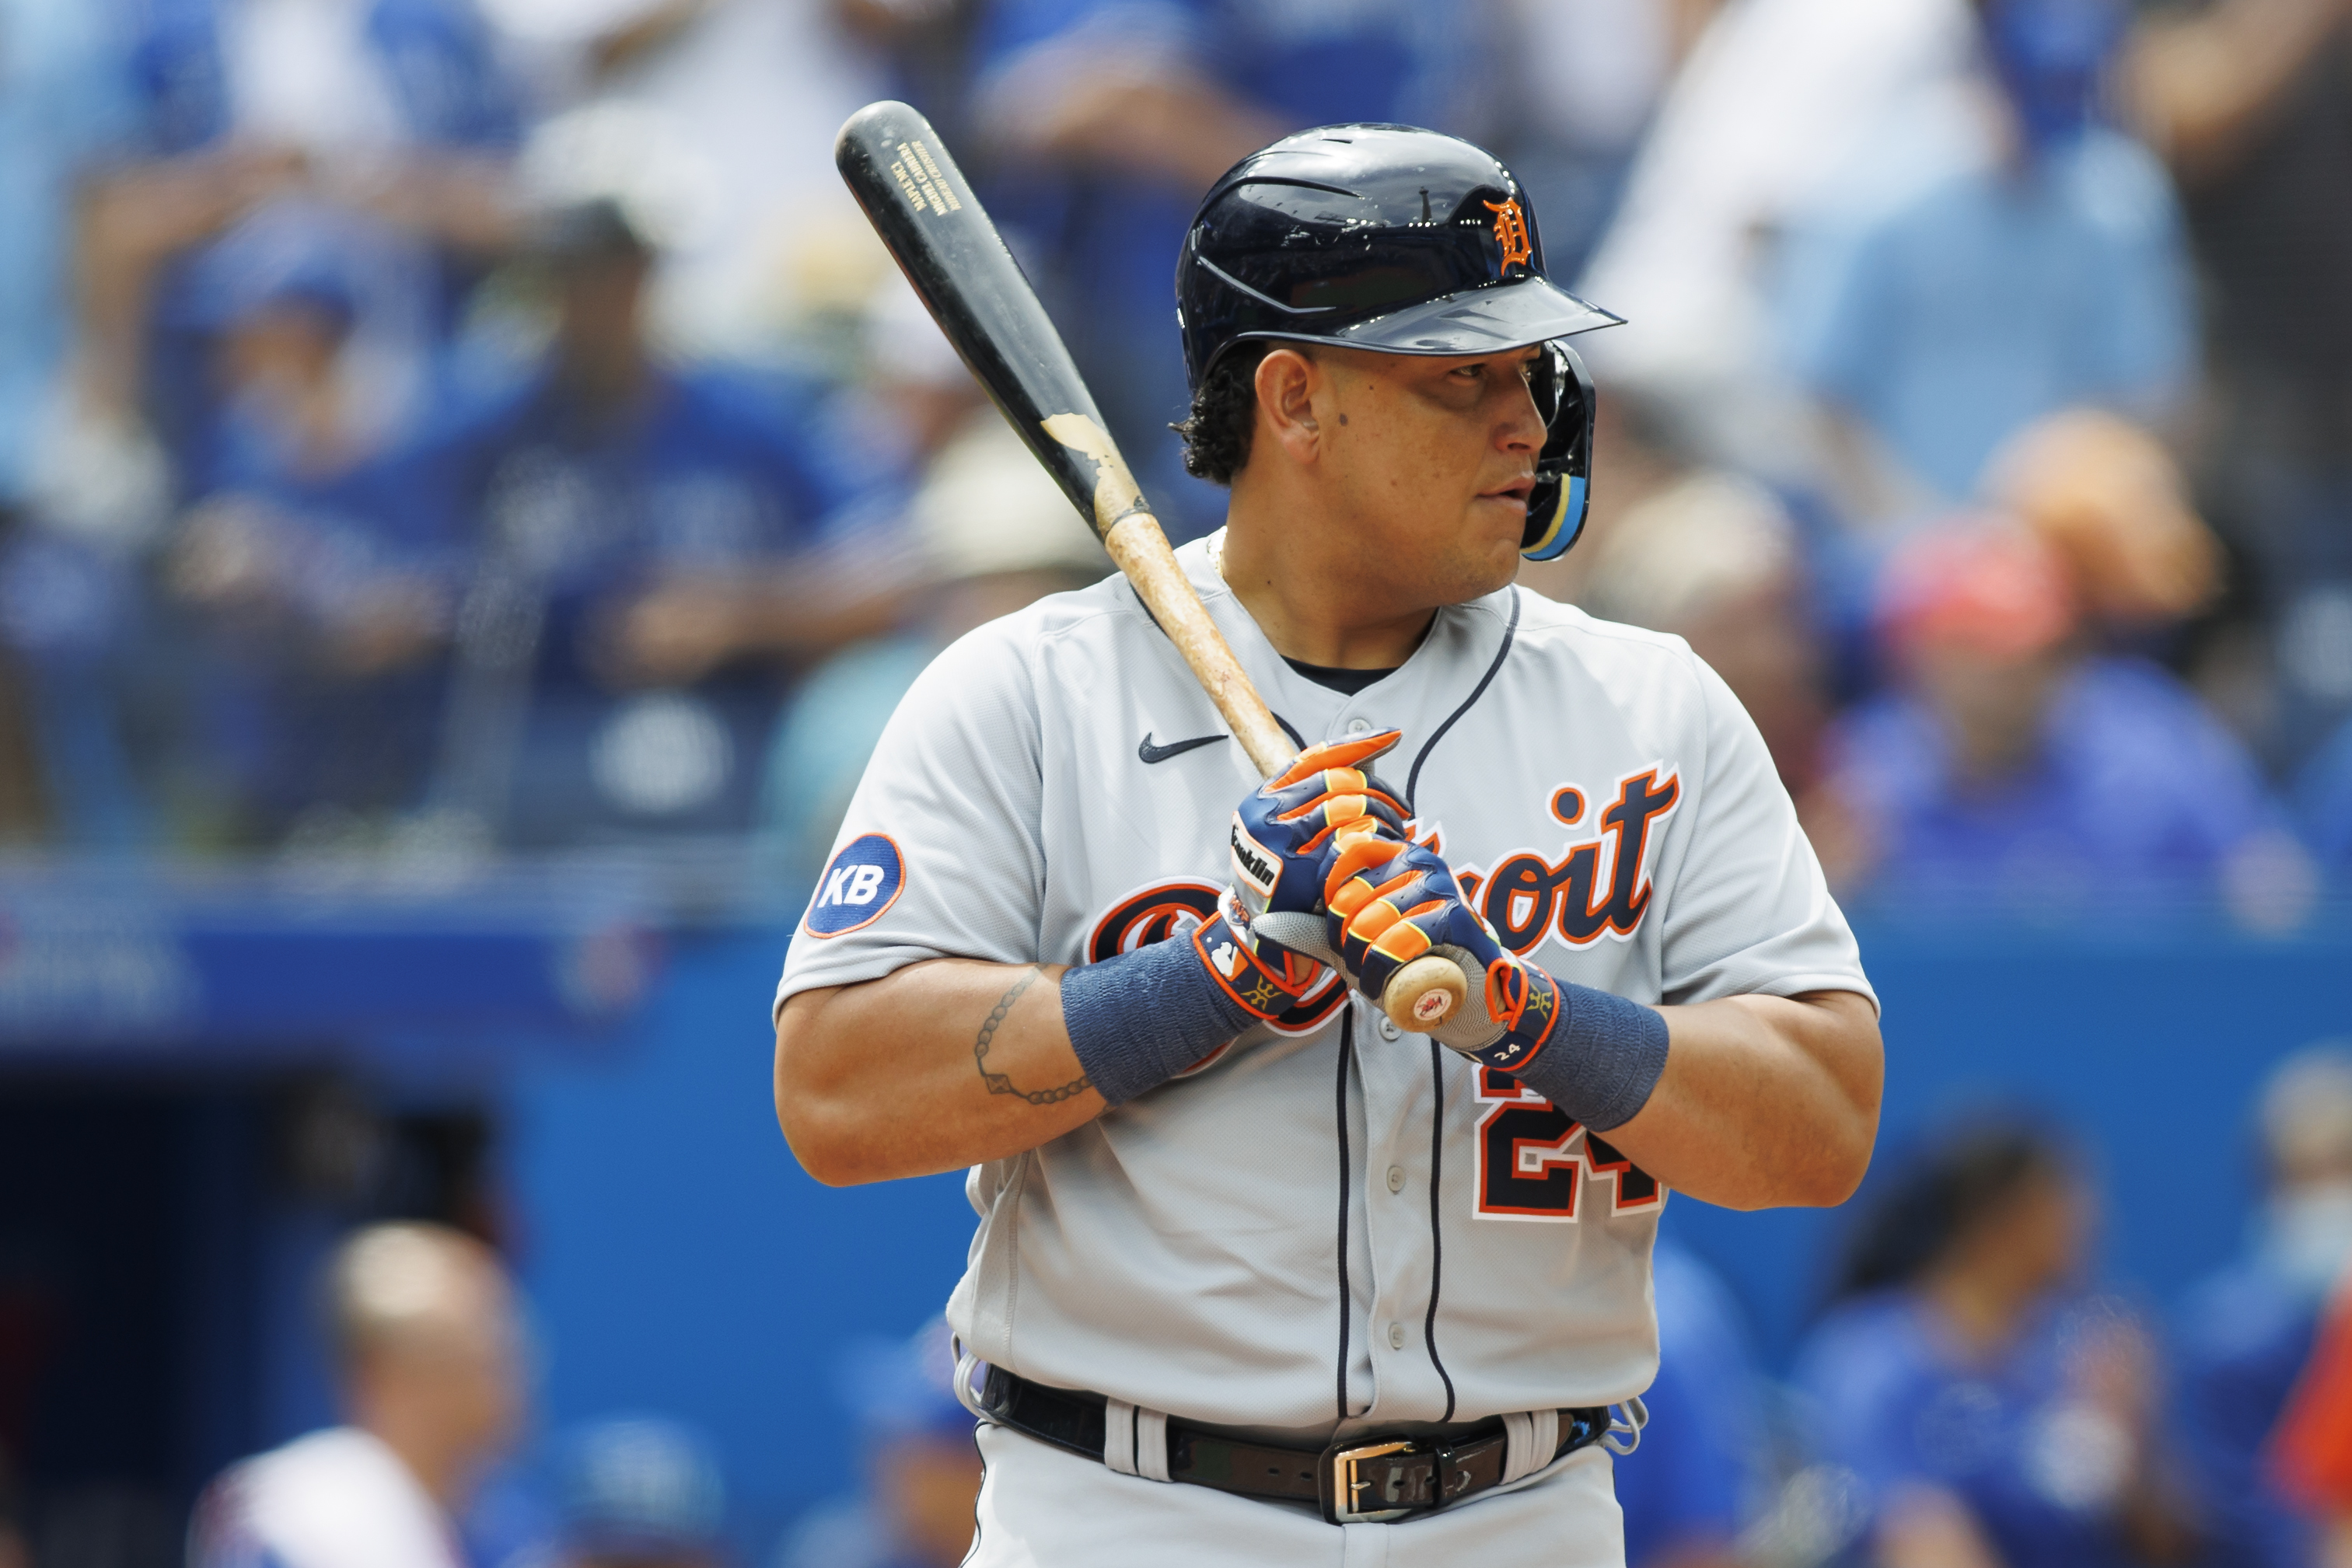 Miguel Cabrera is the 1st Venezuelan-born player to get 3,000 hits